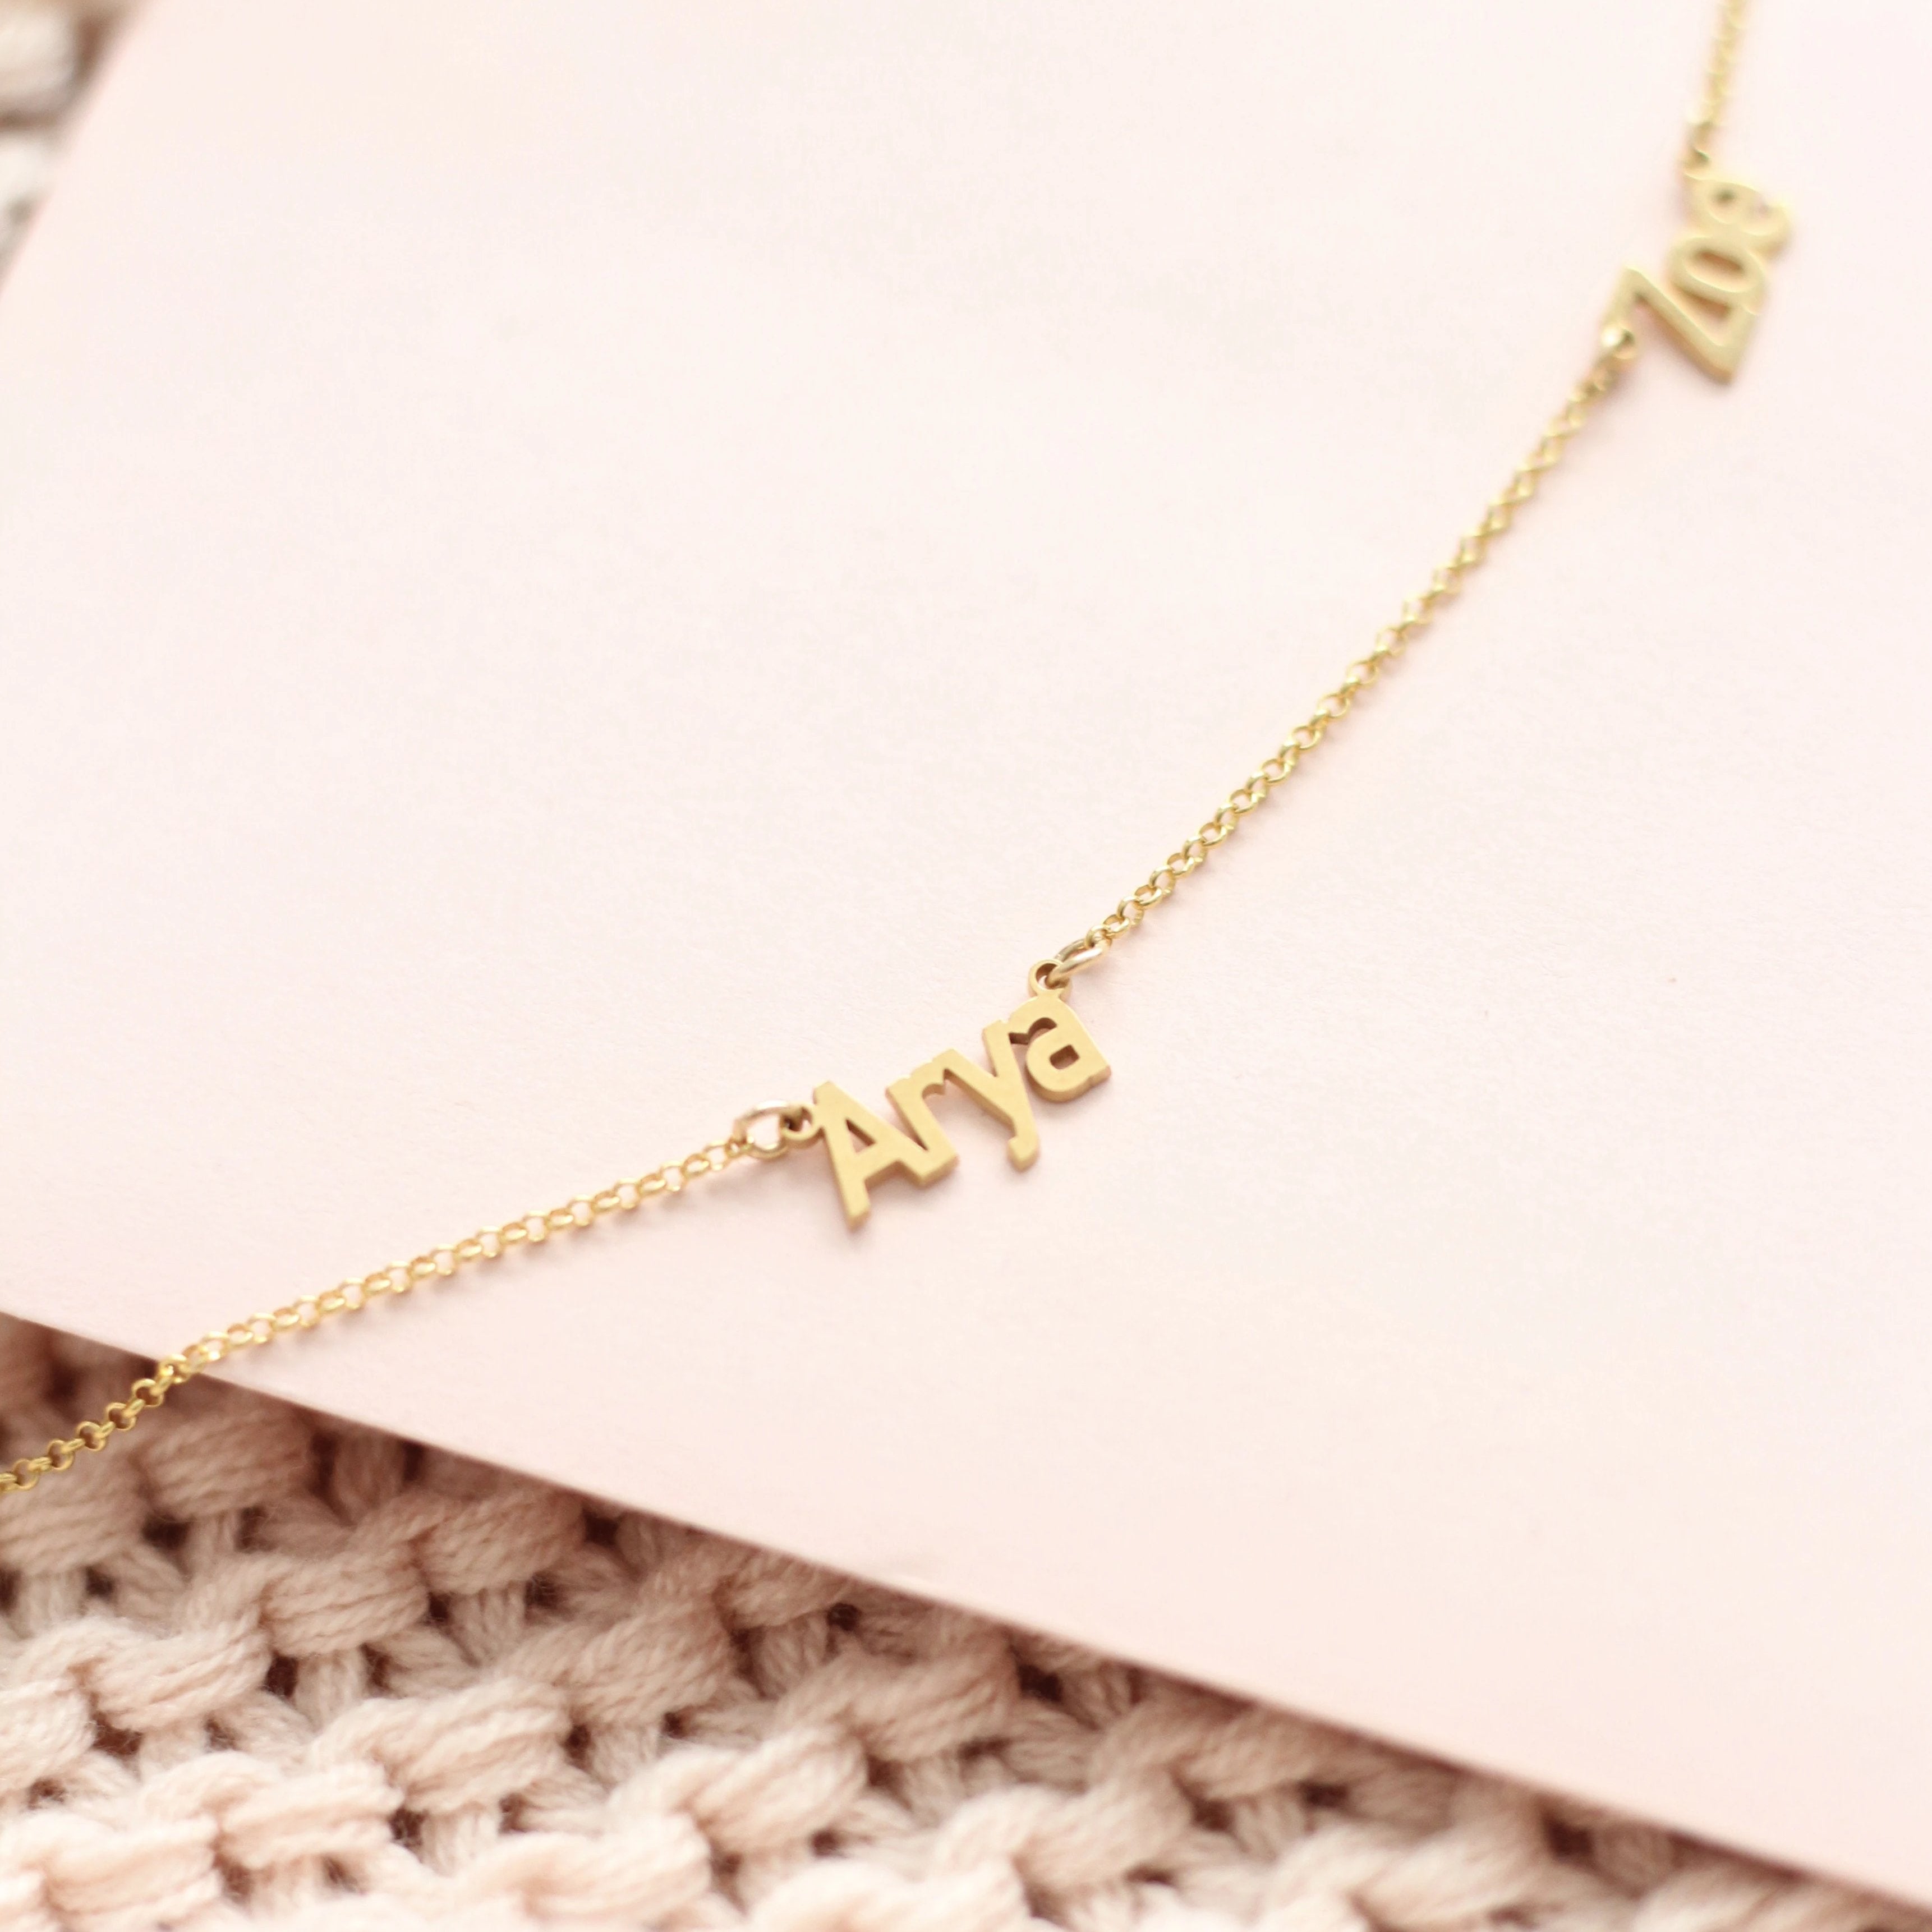 multiple name necklace in arial basic font